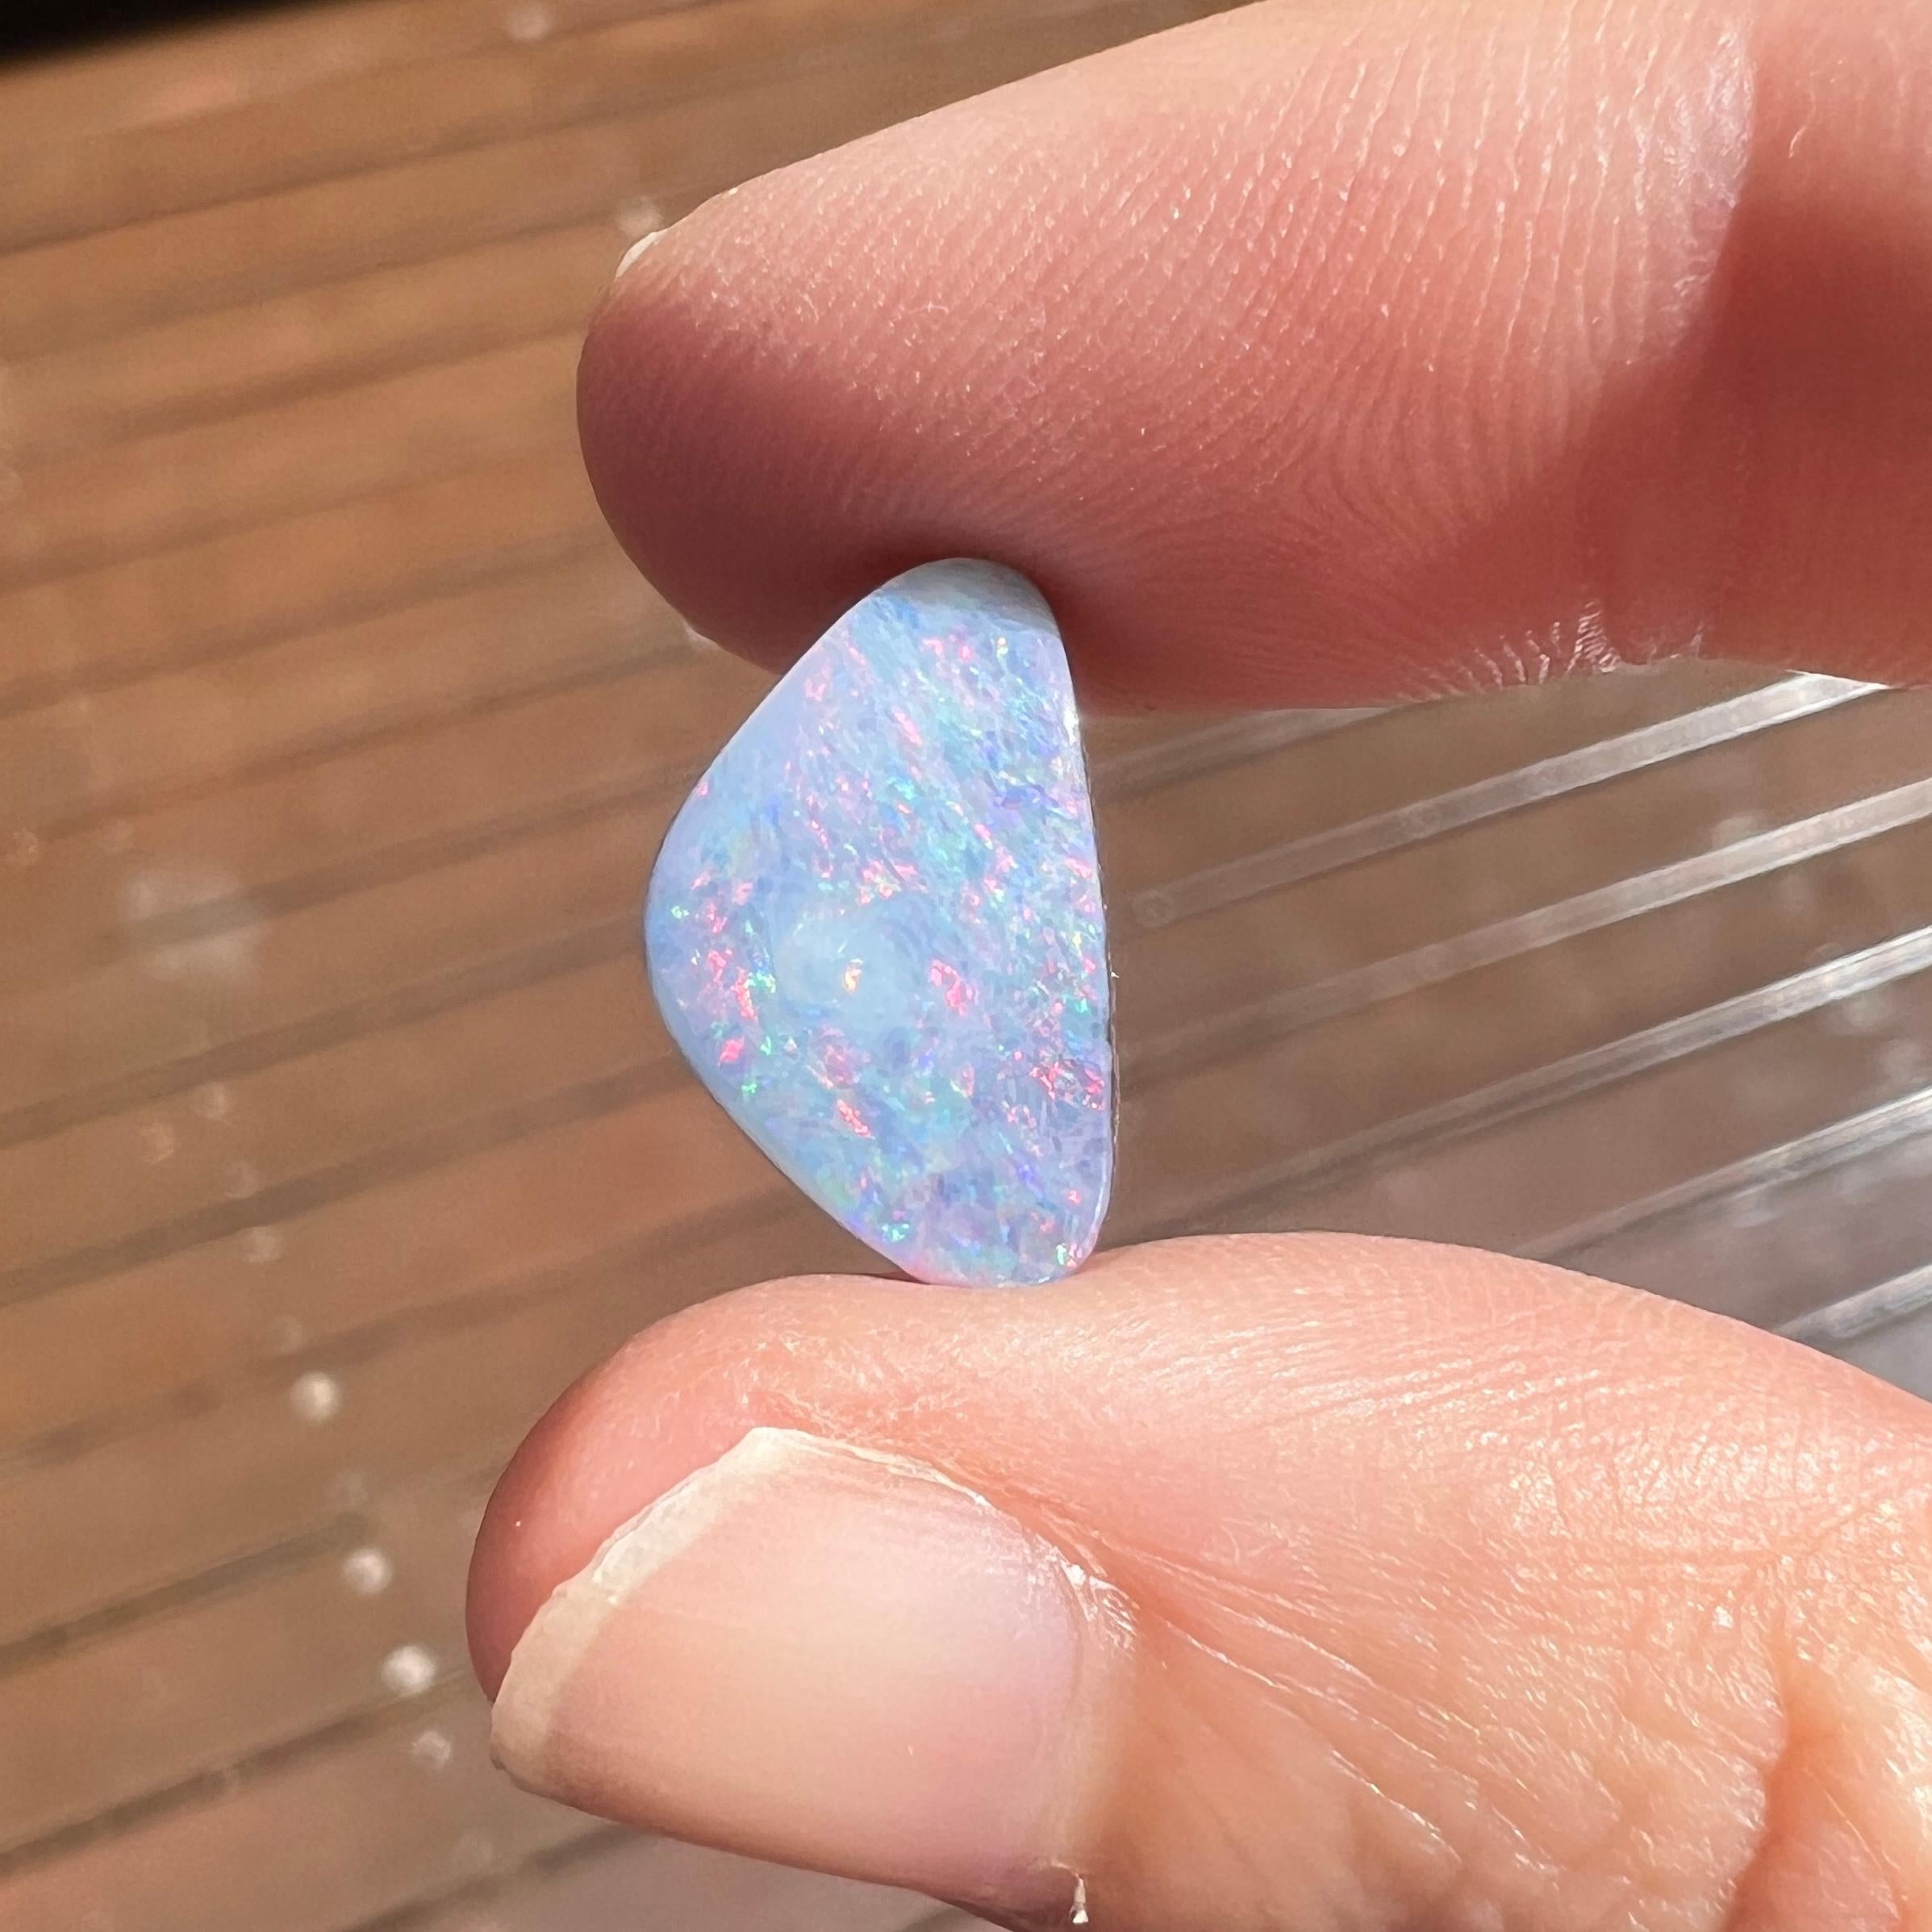 This lovely 5.24 Ct Australian boulder opal was mined by Sue Cooper at her Yaraka opal mine in western Queensland, Australia in 2021. Sue processed the rough opal herself and cut into into a free-form shape. We love the pink colours and its lighter